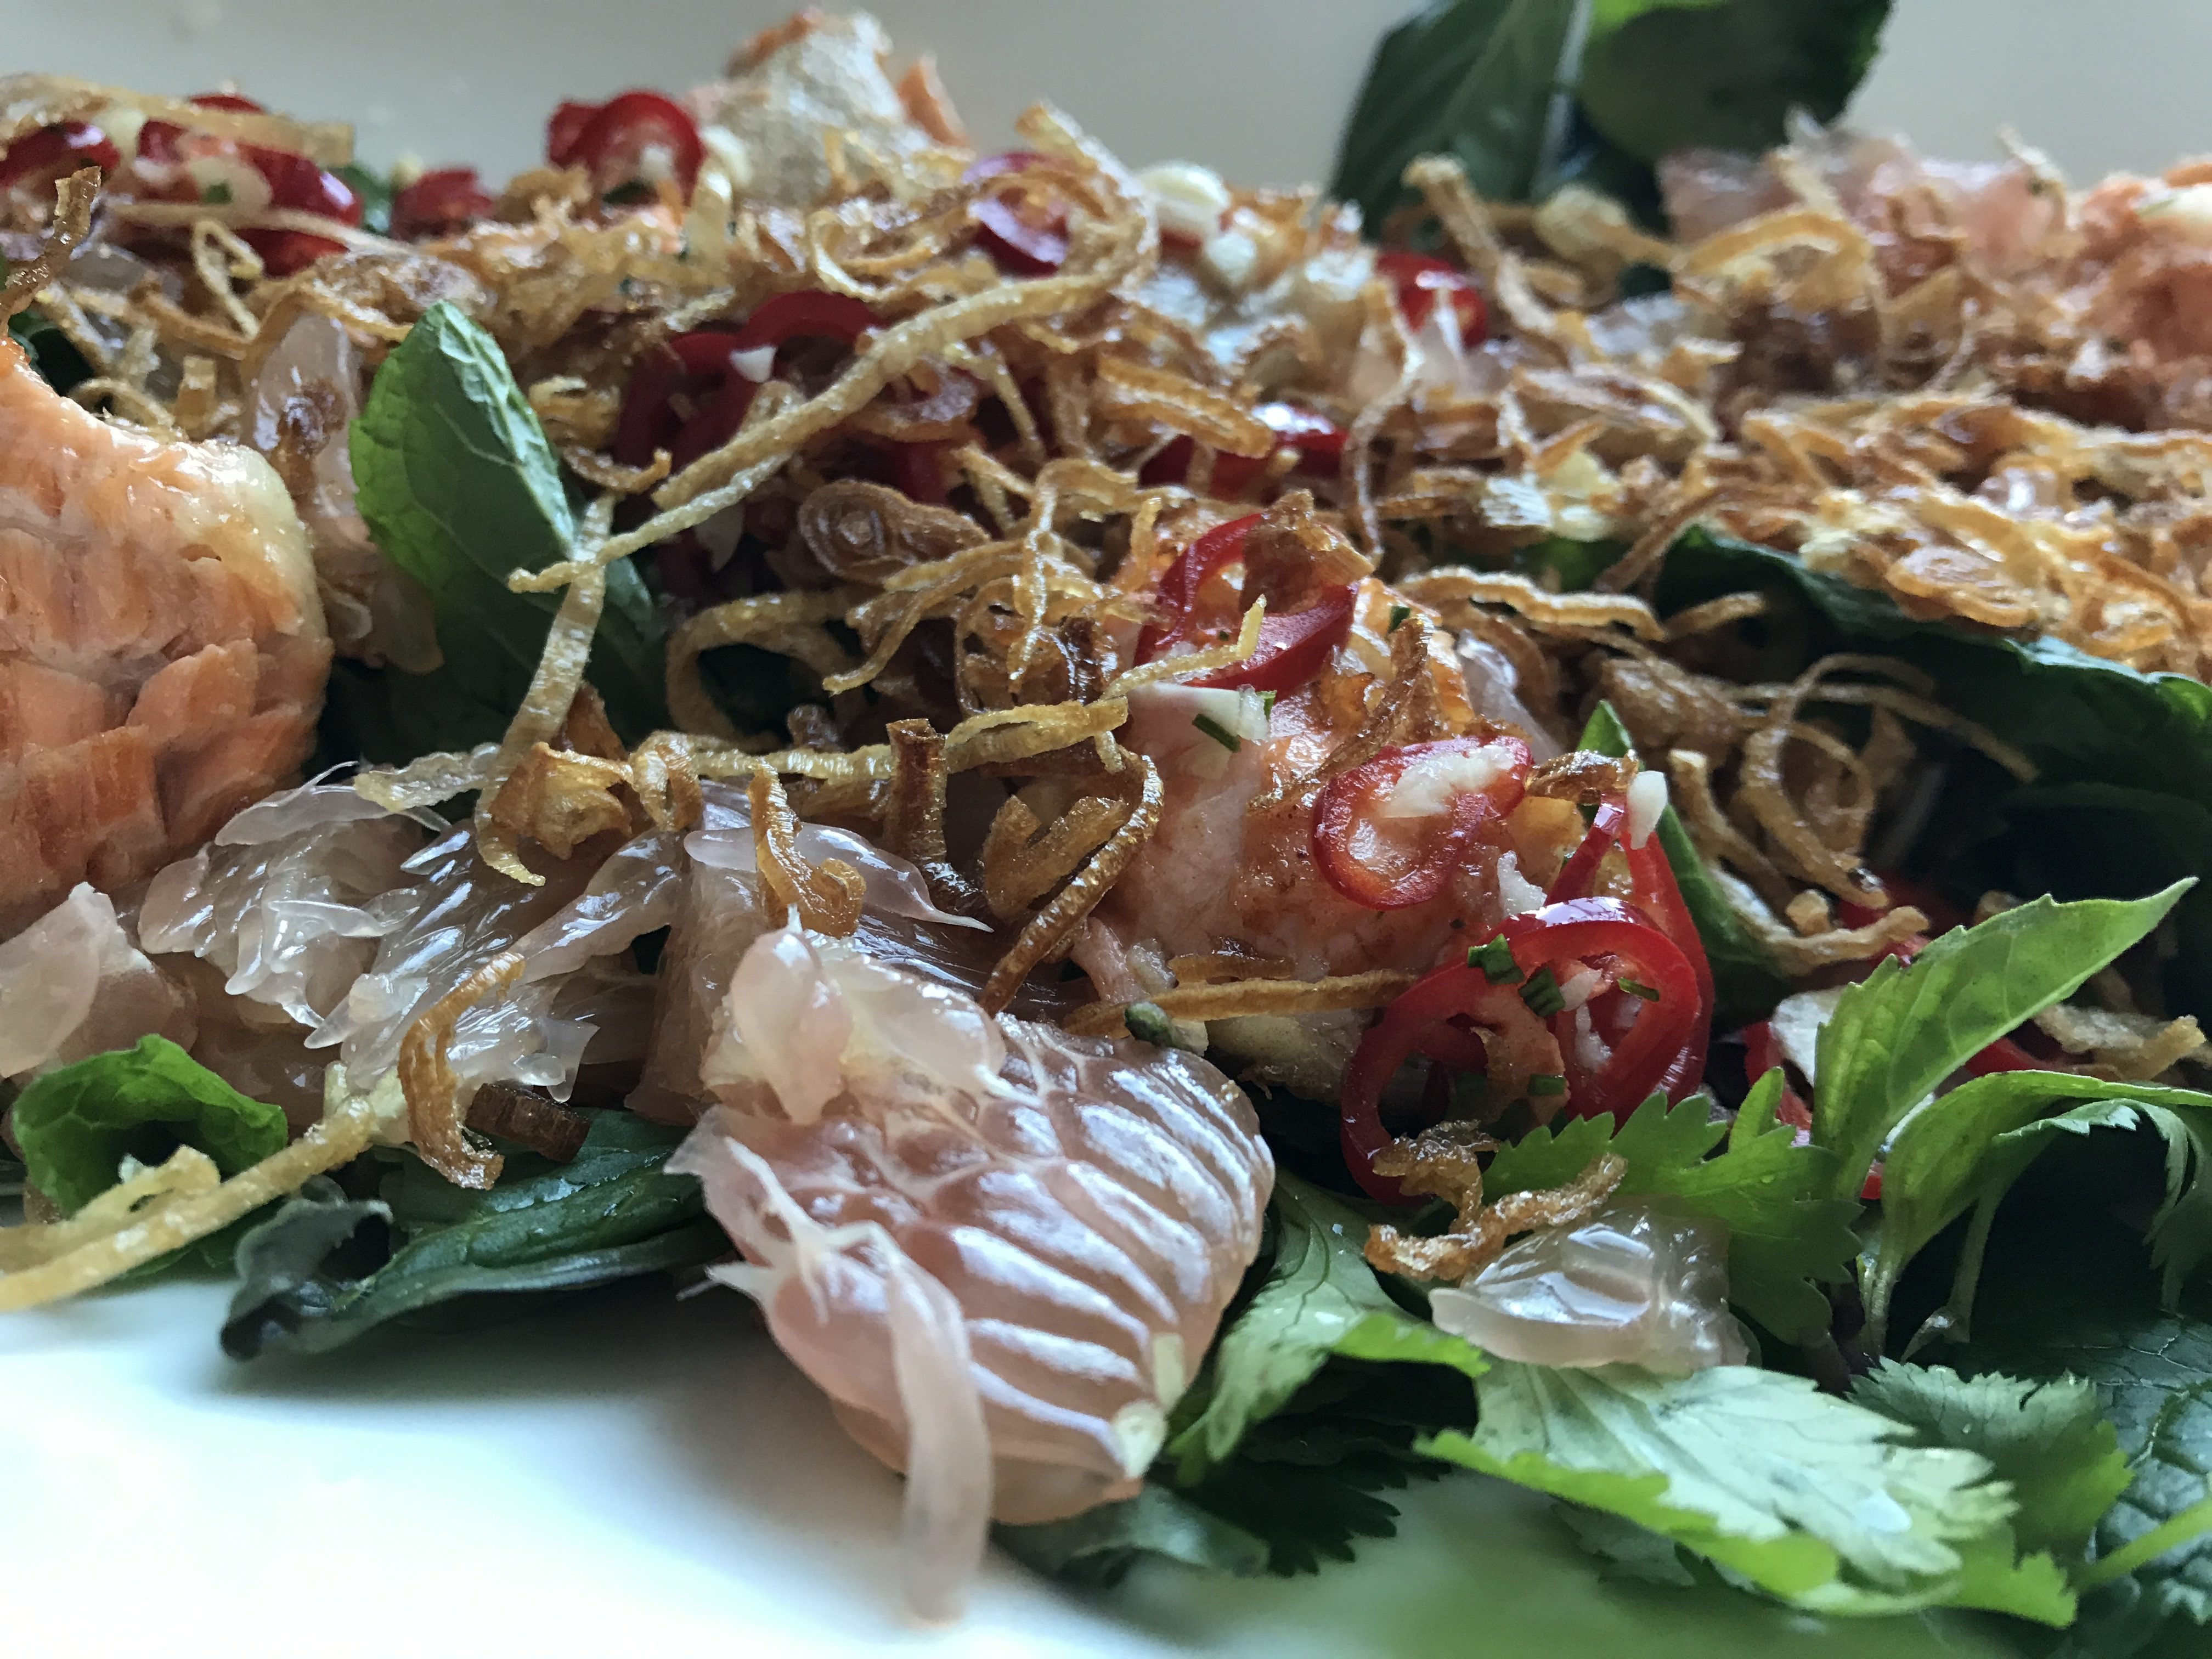 Vietnamese herb and pomelo salad with roasted salmon belly